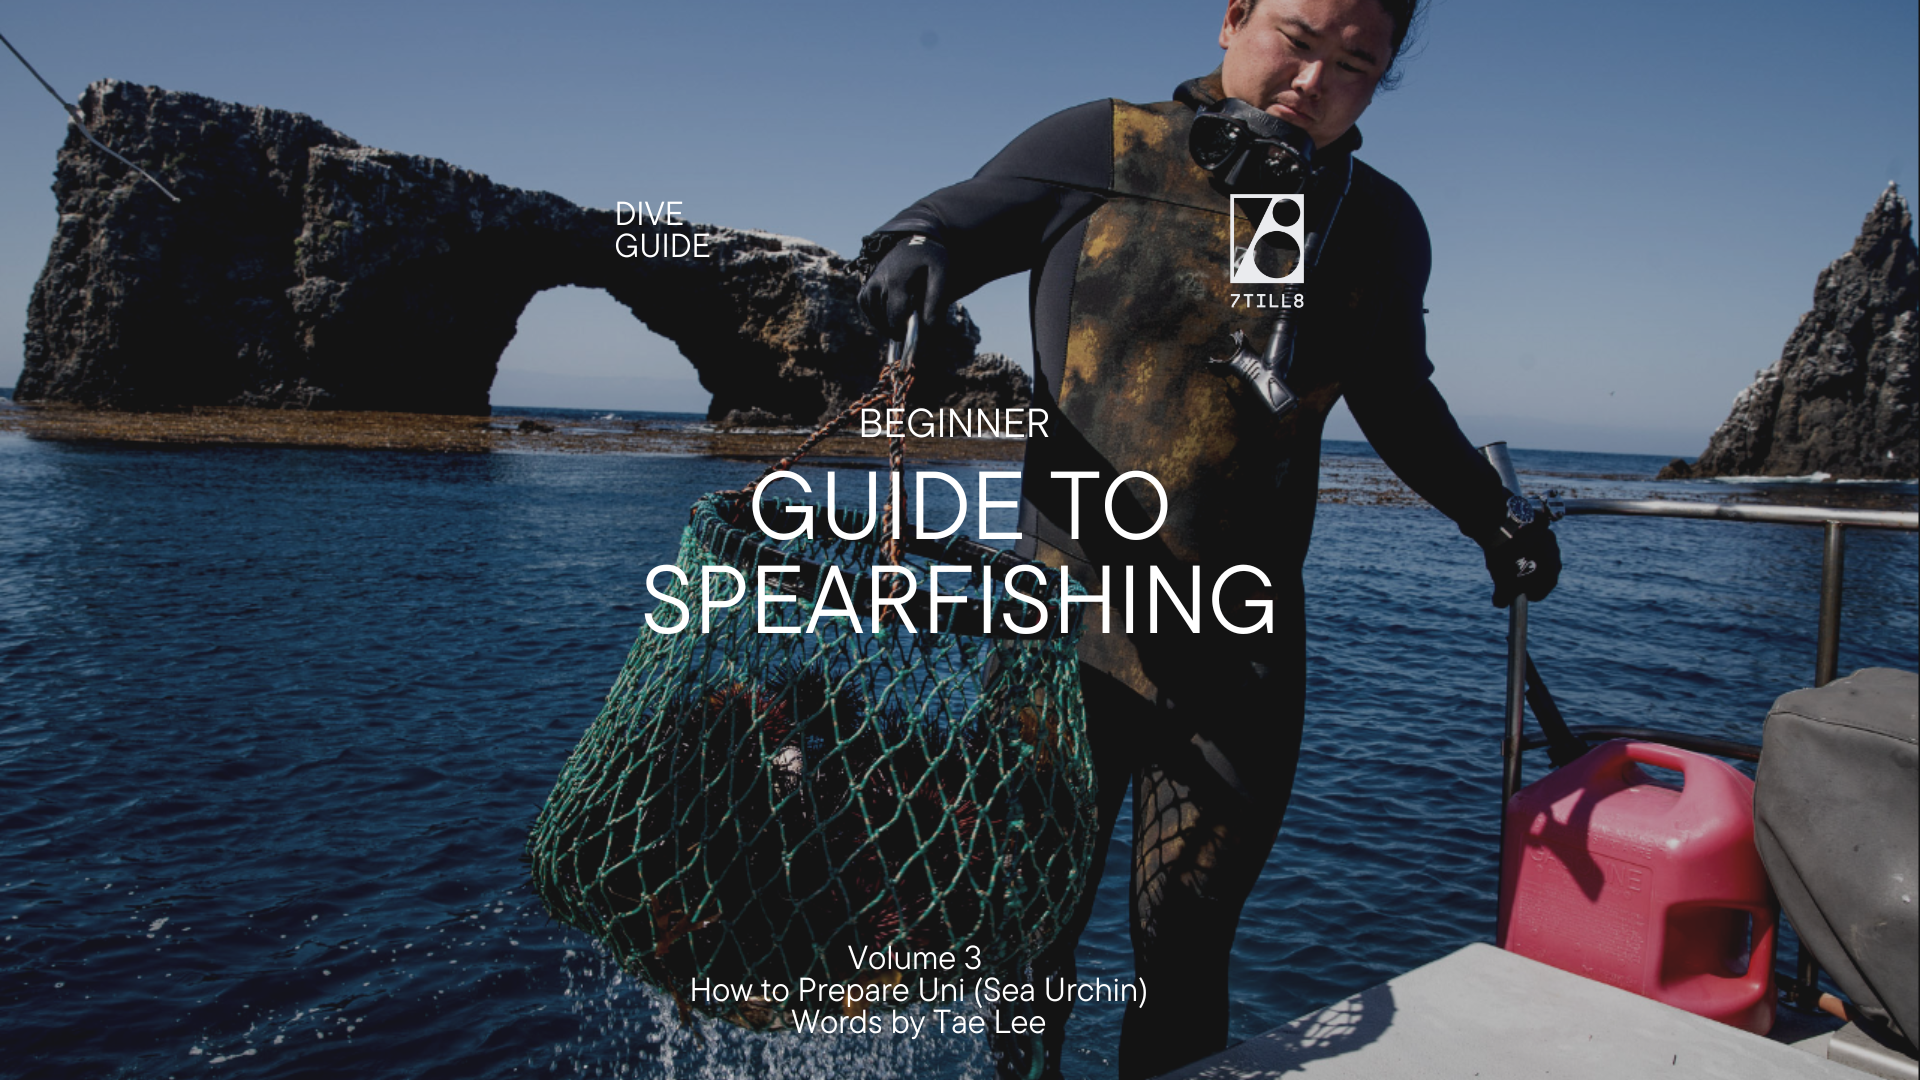 7TILL8's Beginner's Guide to Spearfishing - Vol 3 - How To Prepare Uni (Sea Urchin)